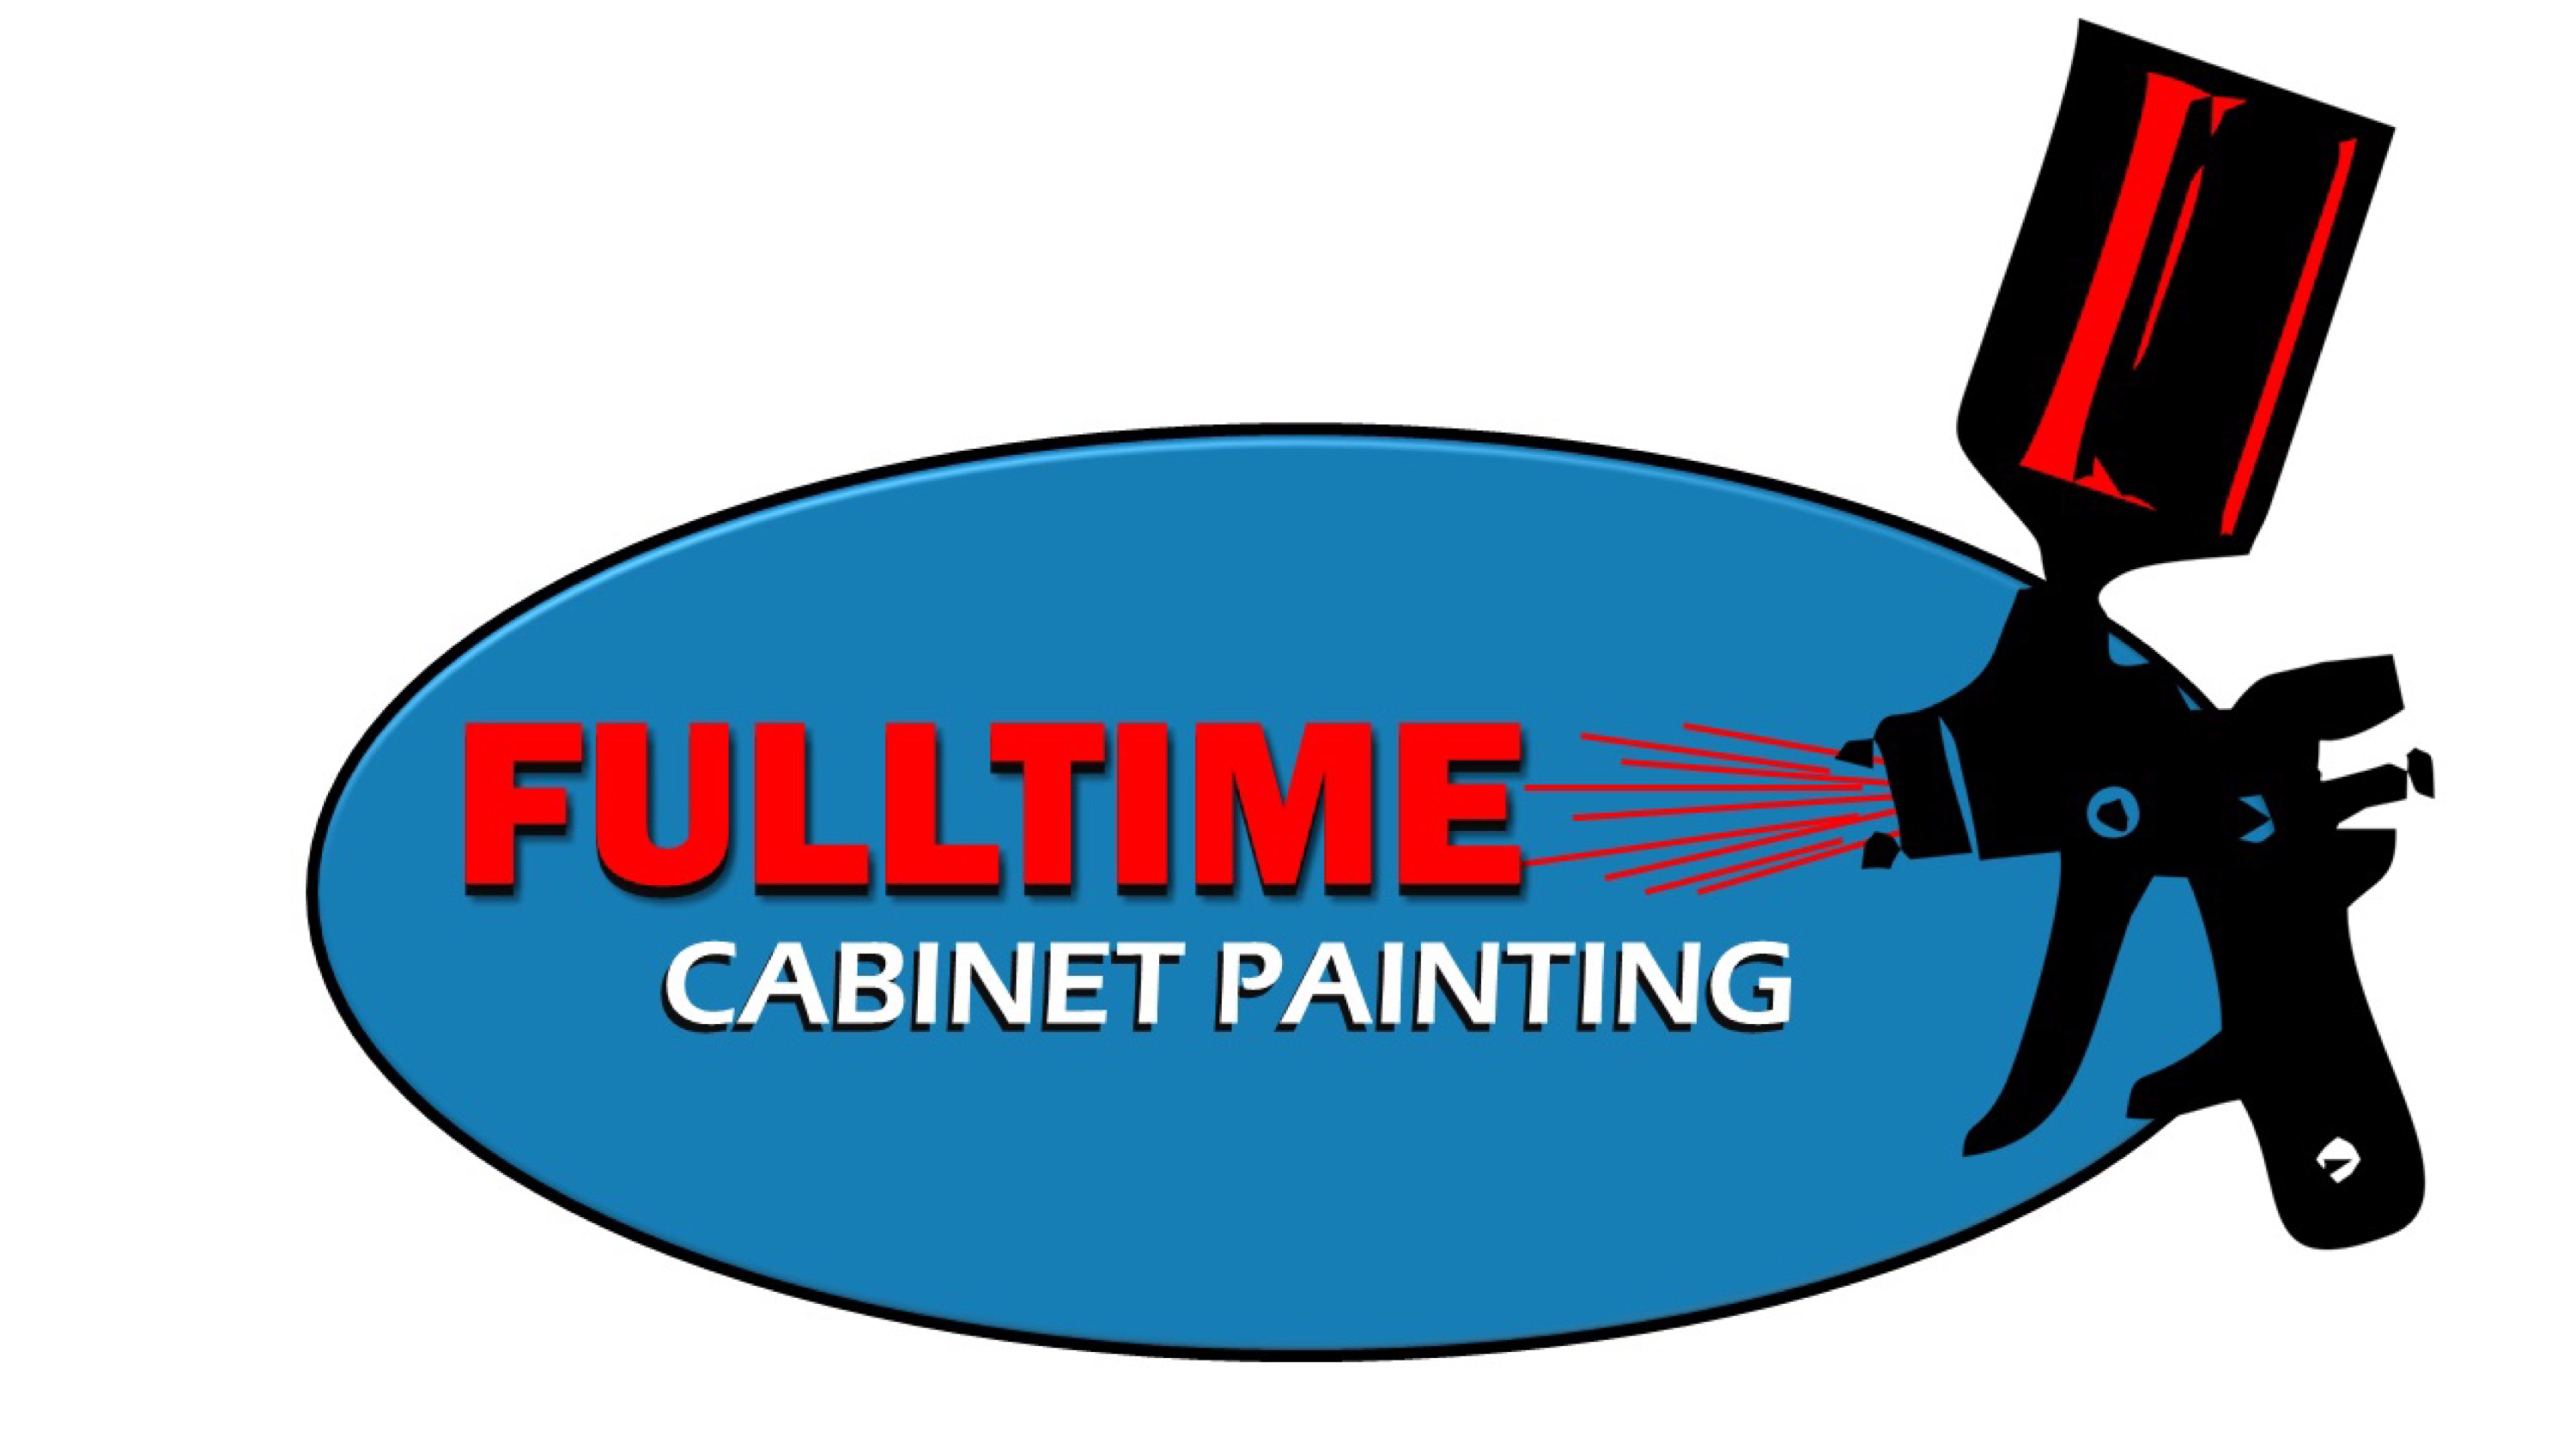 Home Fulltime Cabinet Painting Logo